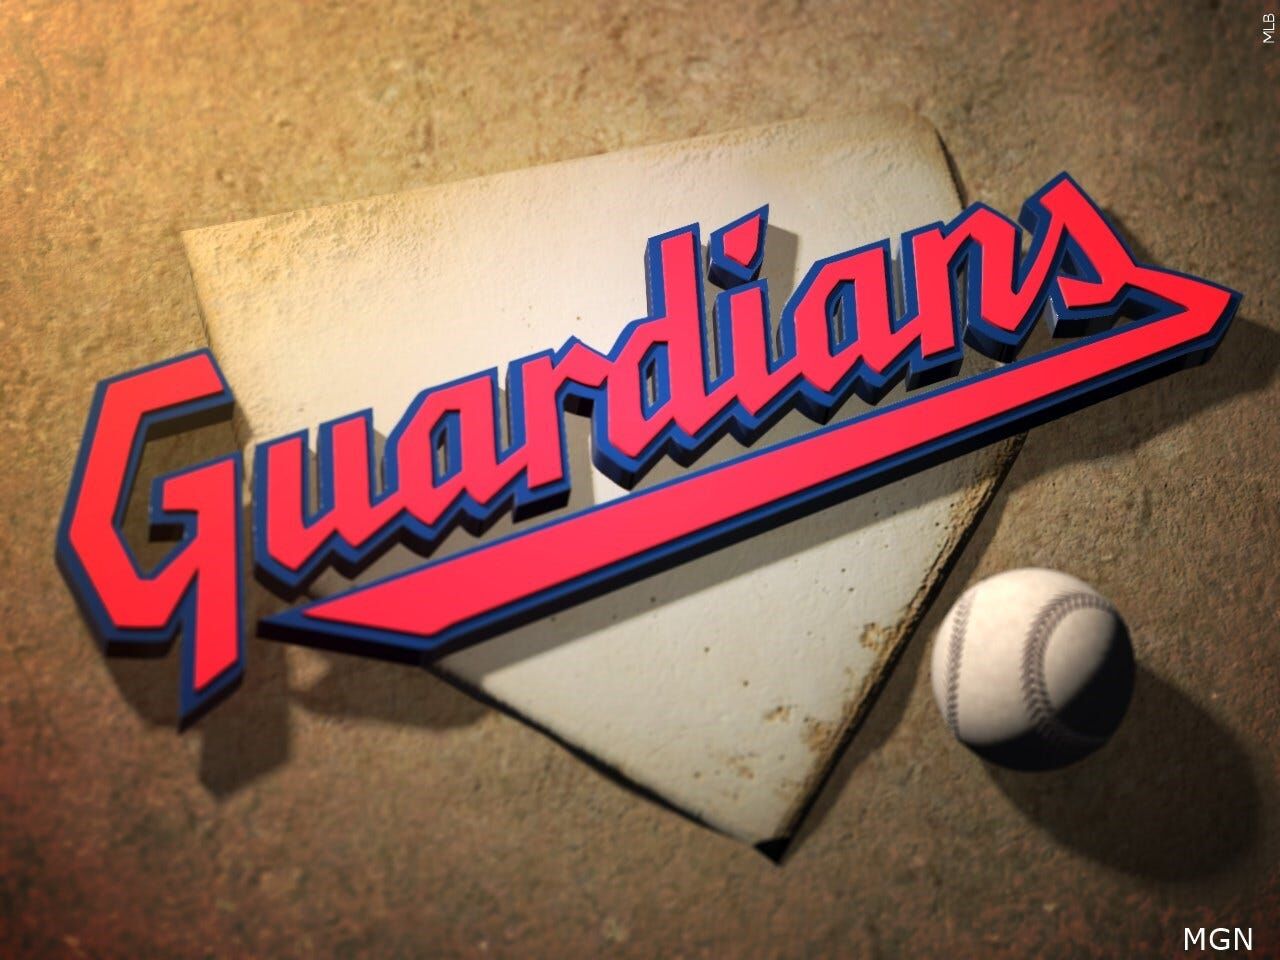 Cleveland MLB team officially changes name to Guardians